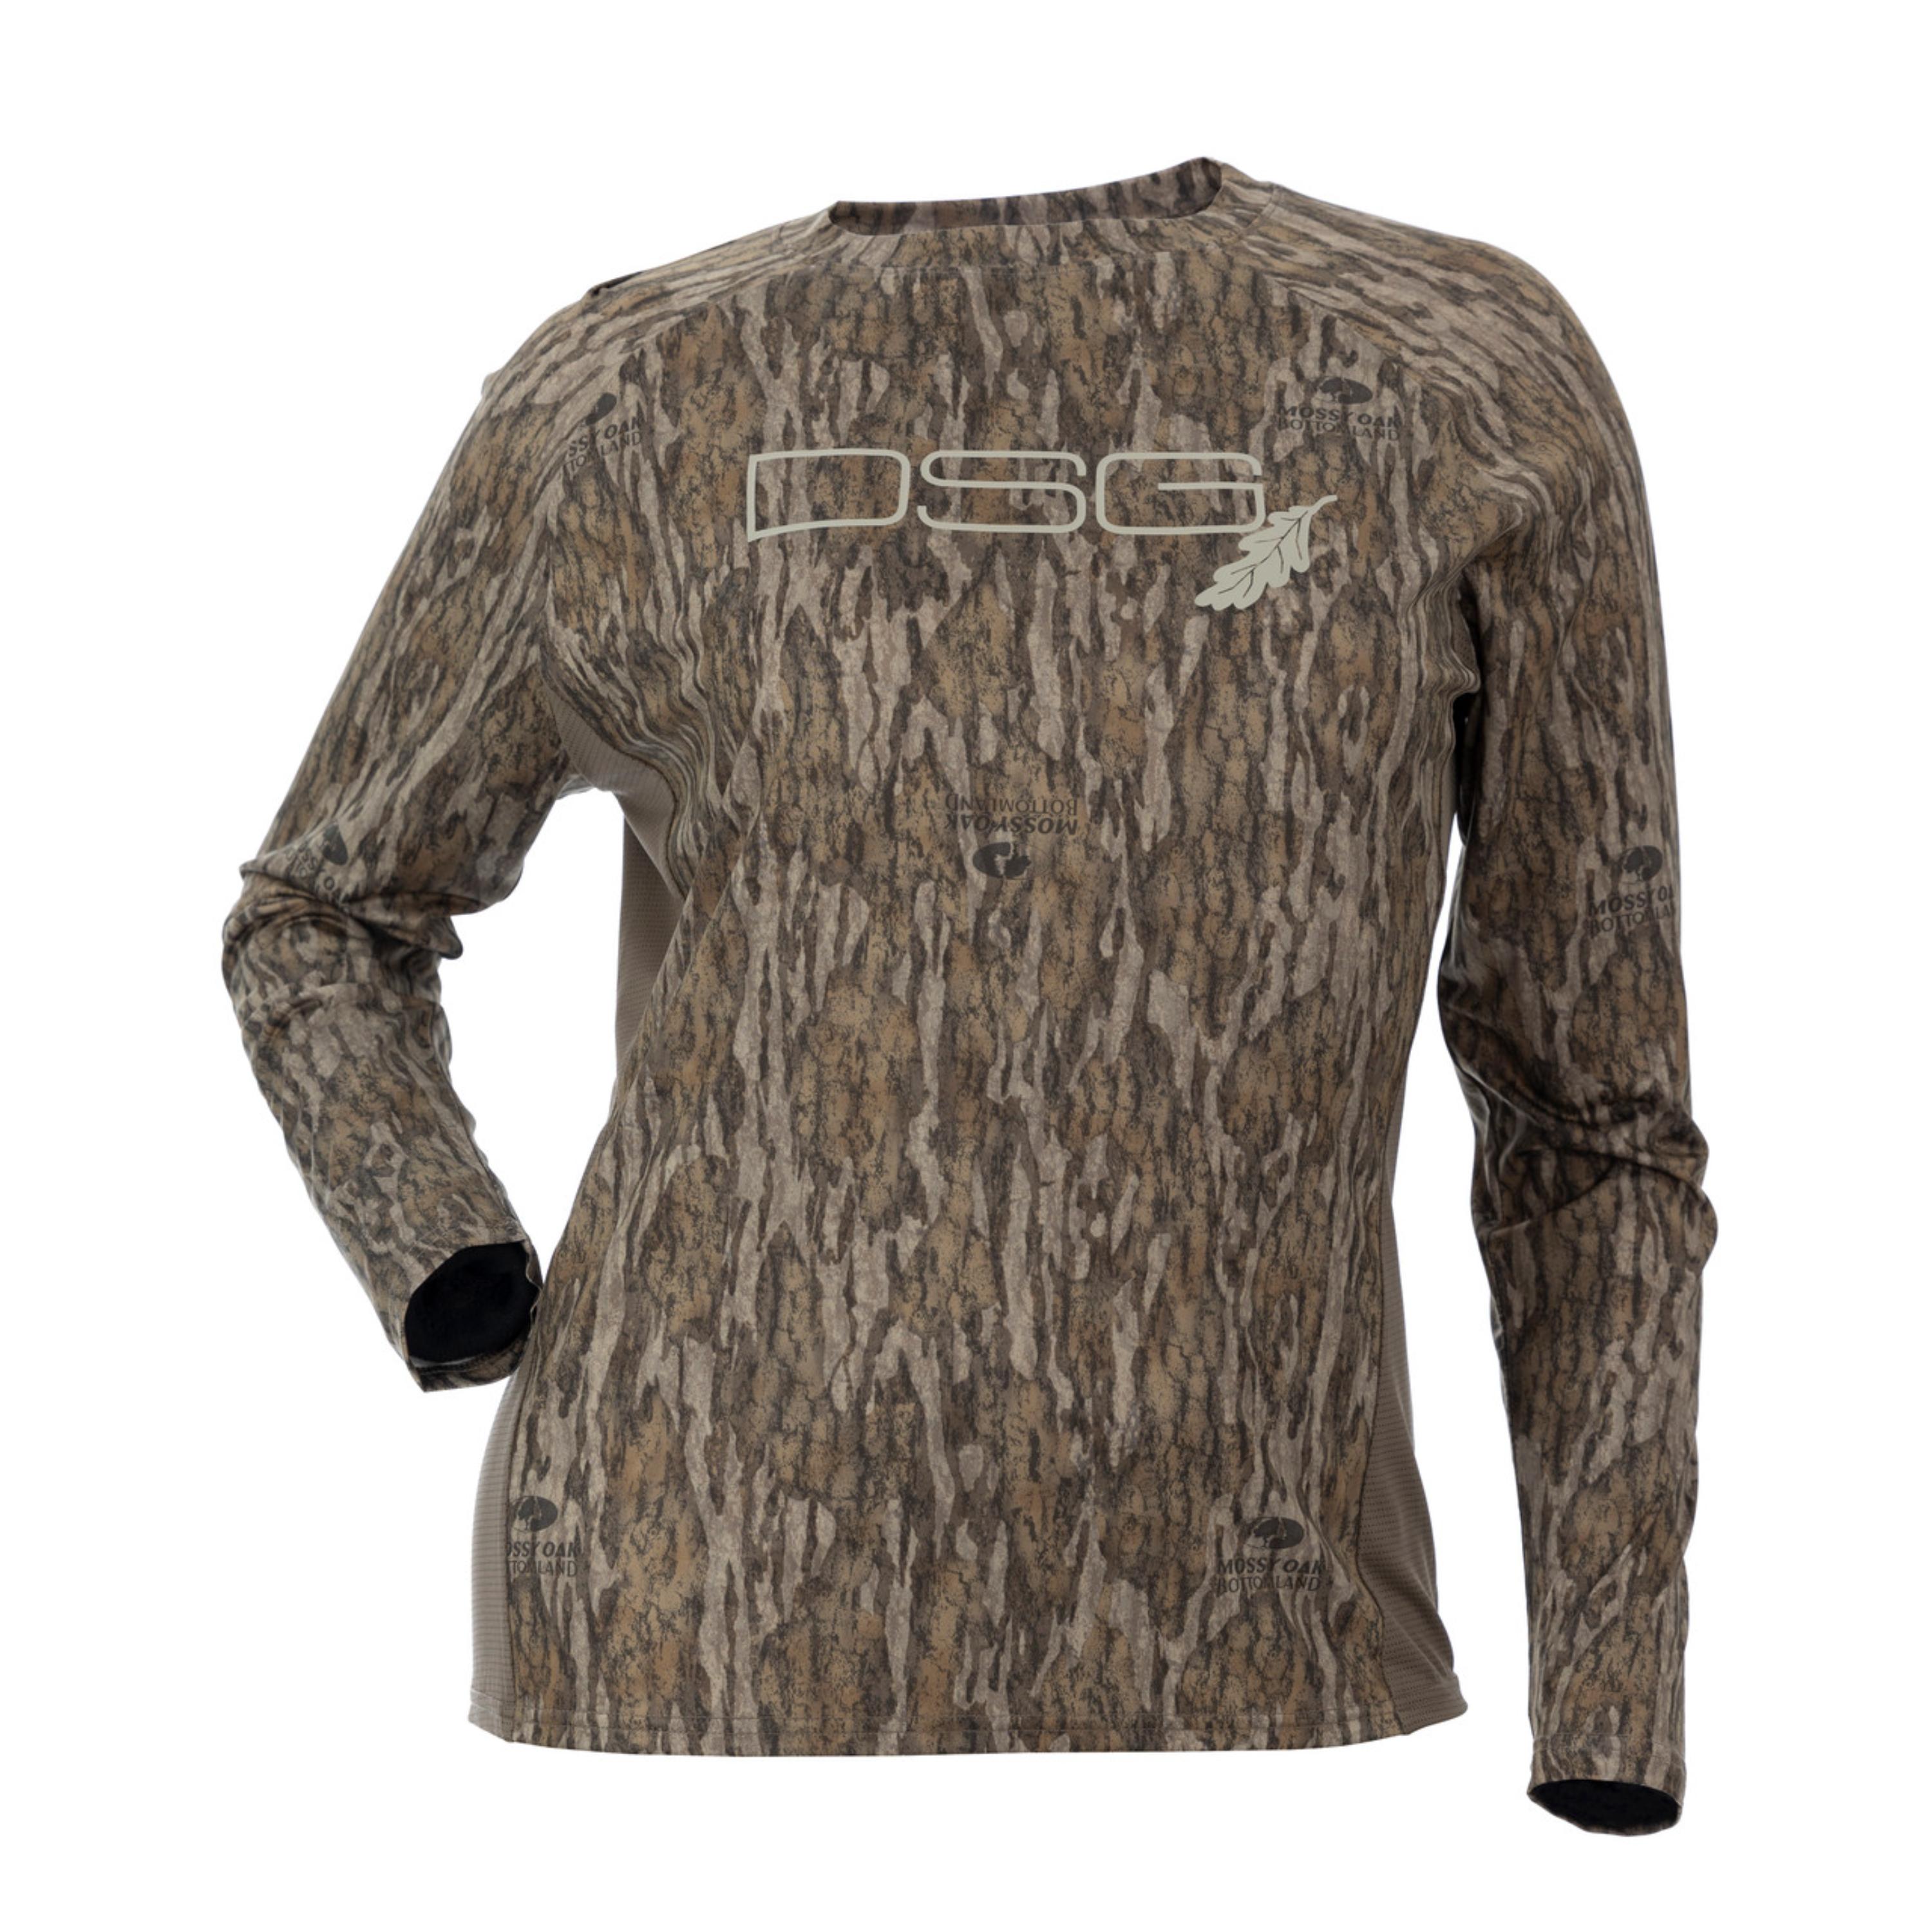 Ultra Lightweight Hunting Shirt - Realtree Edge®, Realtree Excape®,  Realtree Timber®, Mossy Oak® Obsession®, Mossy Oak® Bottomland®, Mossy Oak®  Country DNA®, Charcoal, Olive or Stone